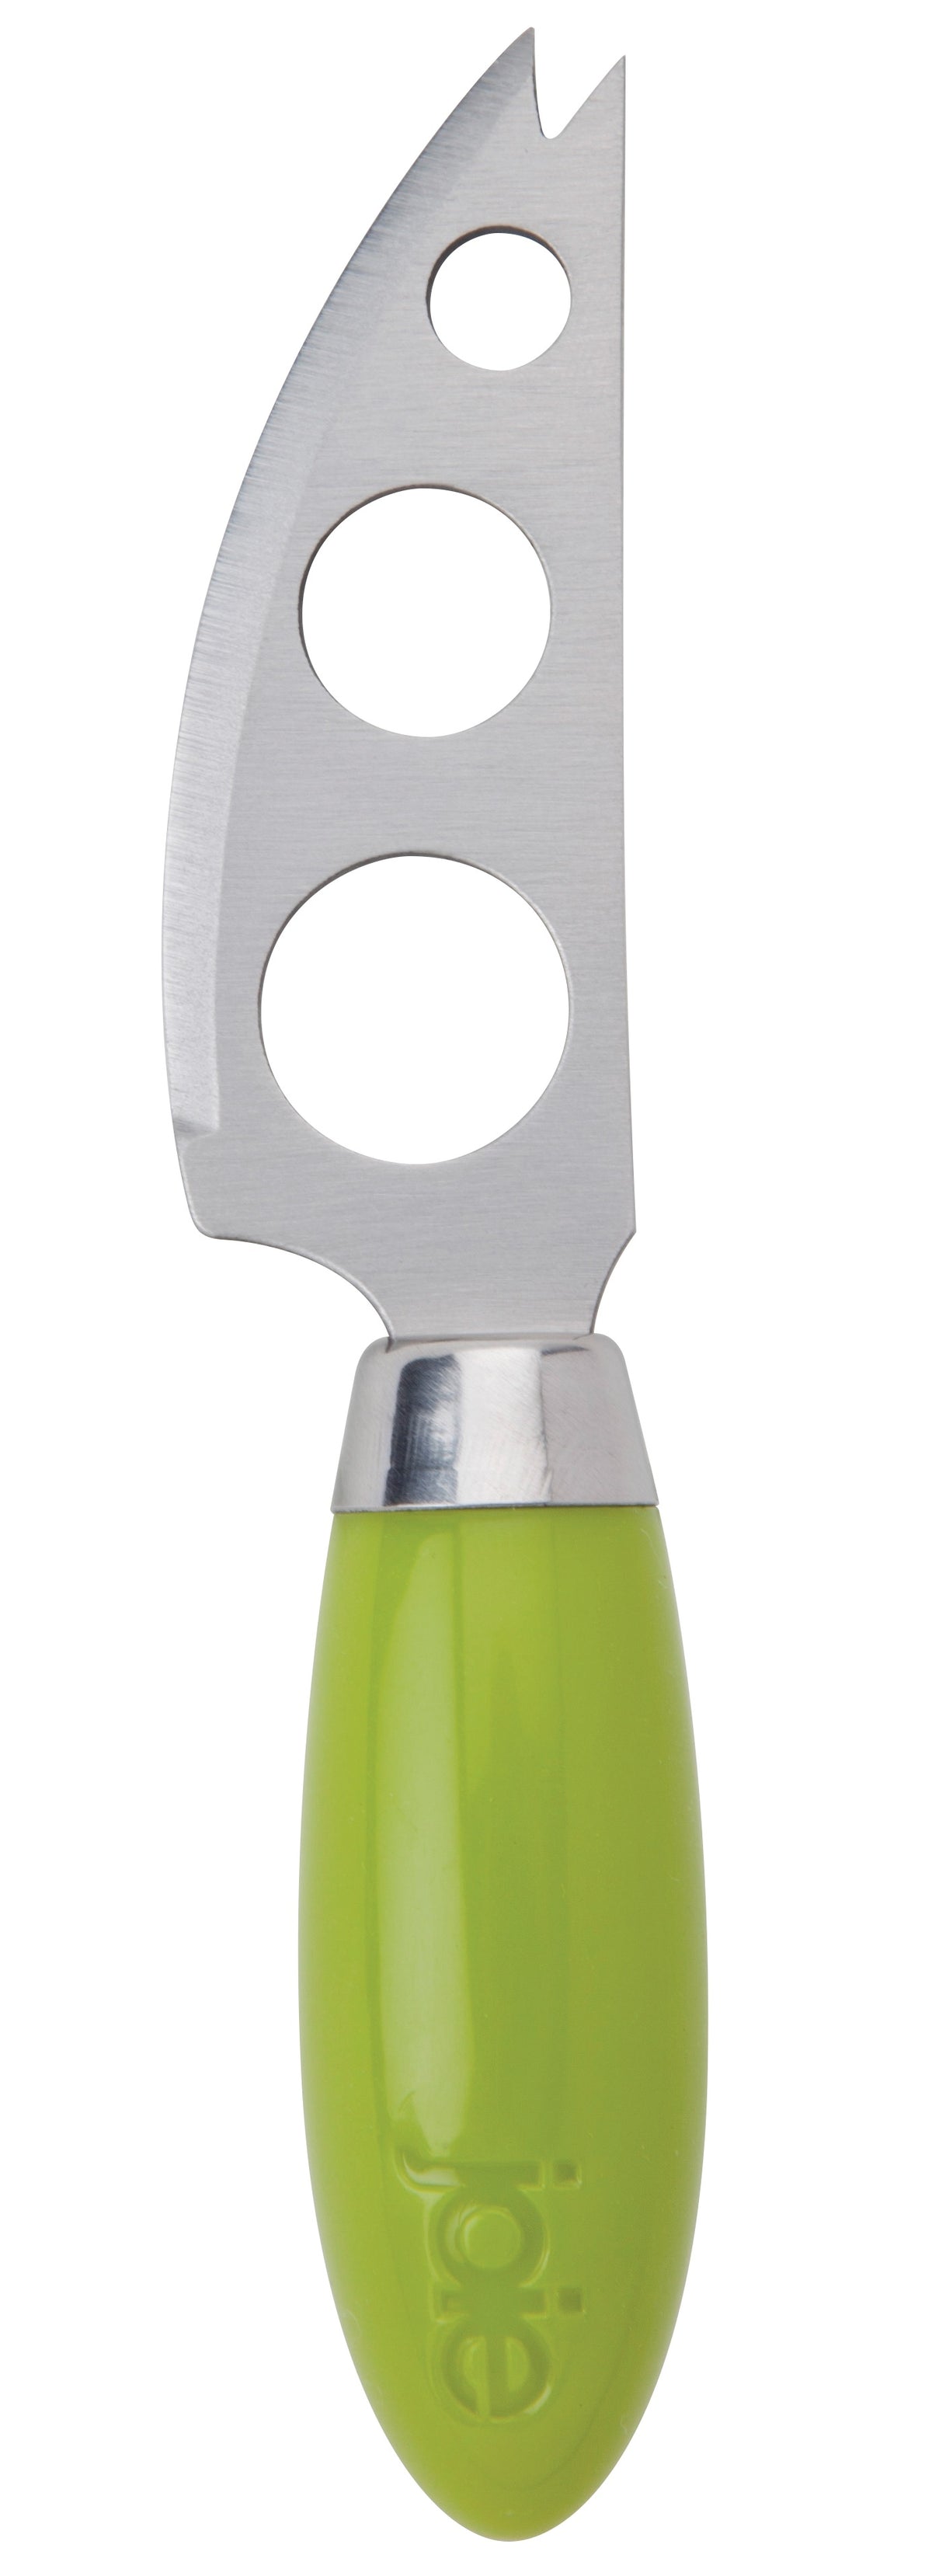 Joie MSC 26634 Mini Cheese Knife, Assorted Colors